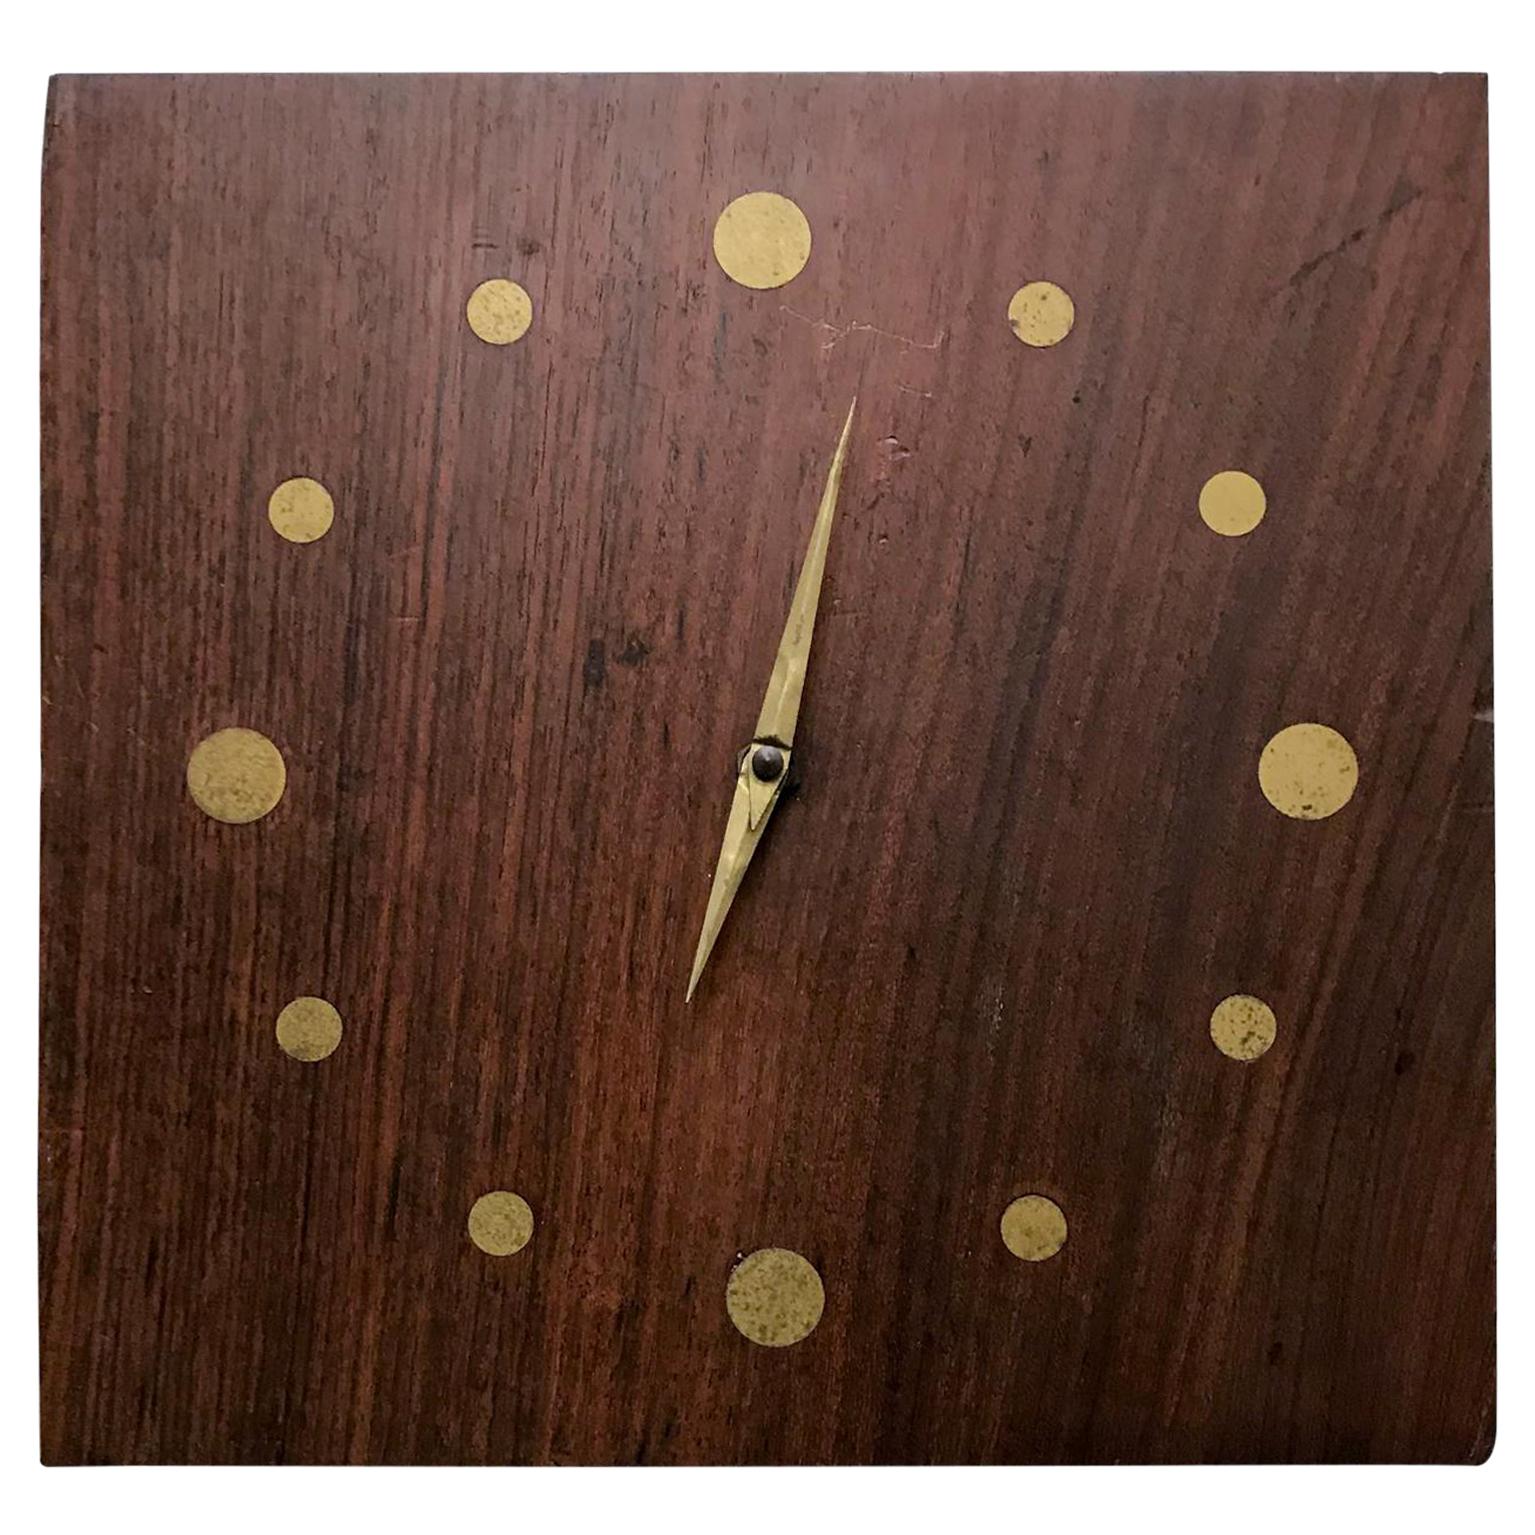 Solid Rosewood and Brass Wall Clock Mid-Century Modern Period